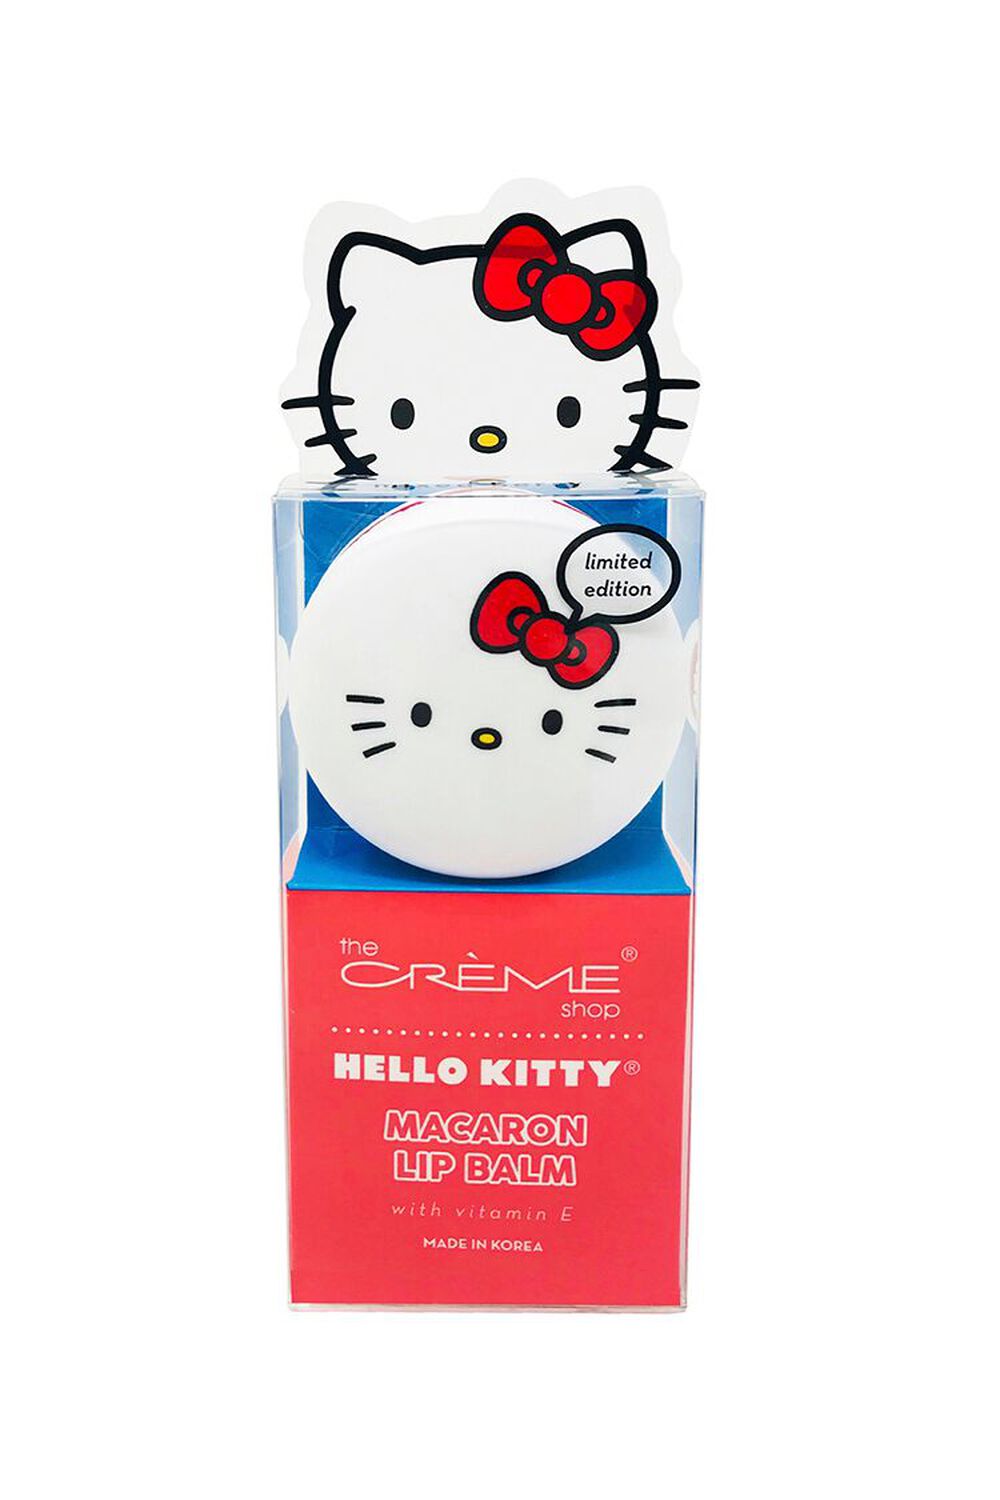 Soothing Angel Hello Kitty Sheet Face Mask